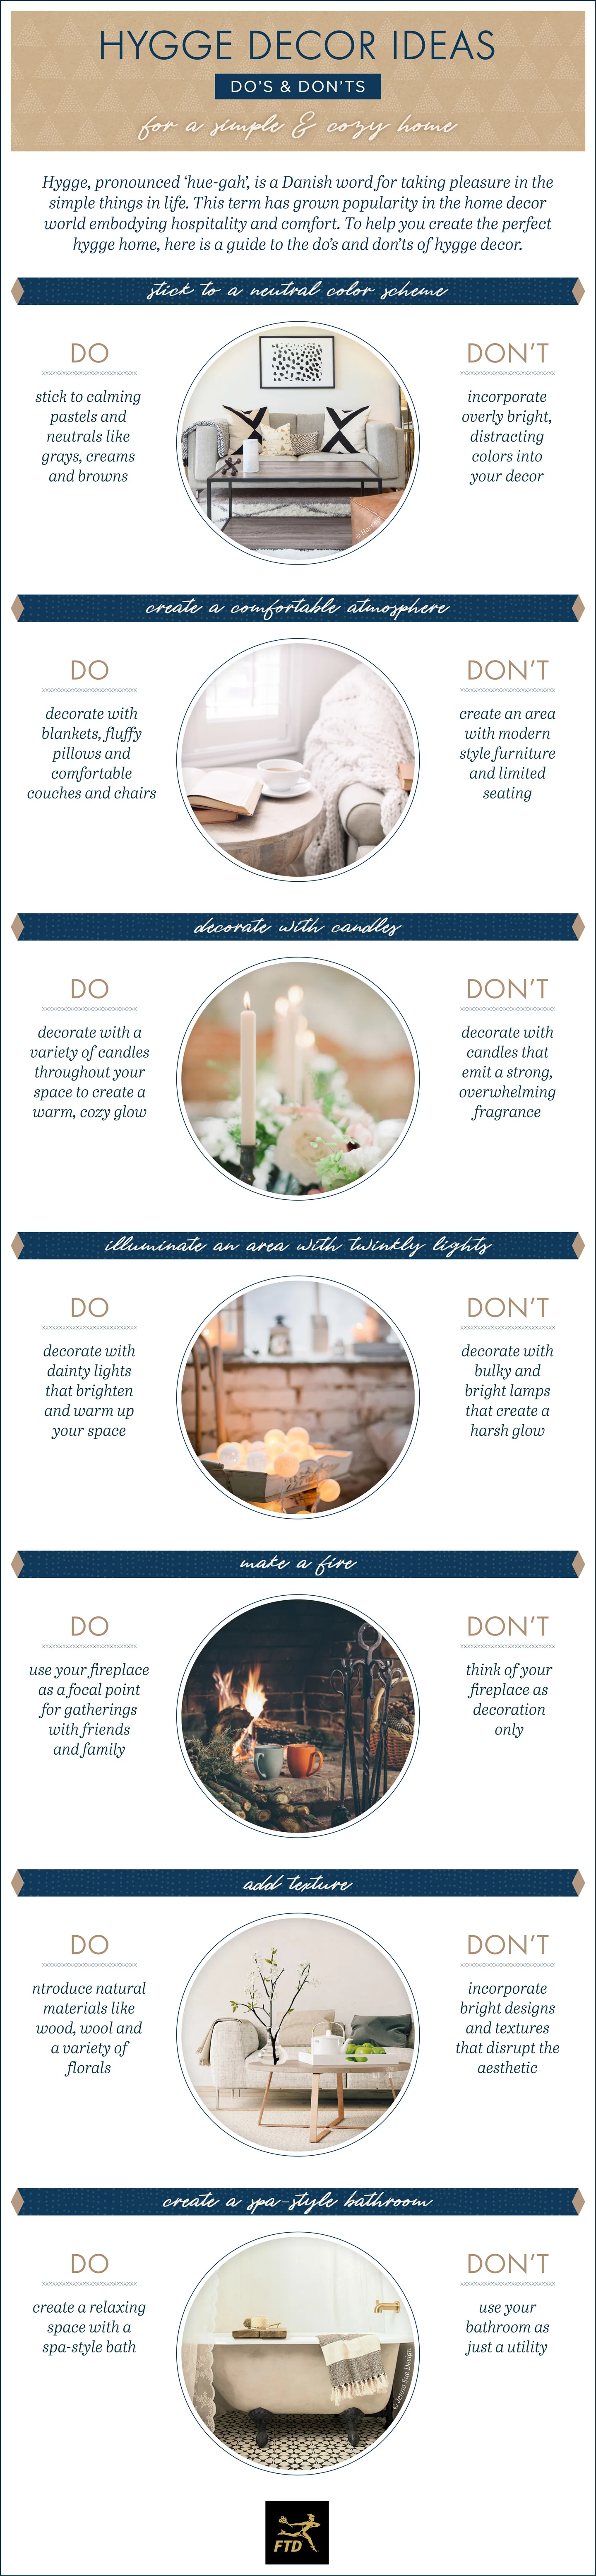 7 Tips to Hygge Your Home: The Do’s and Don’ts of Hygge Decor